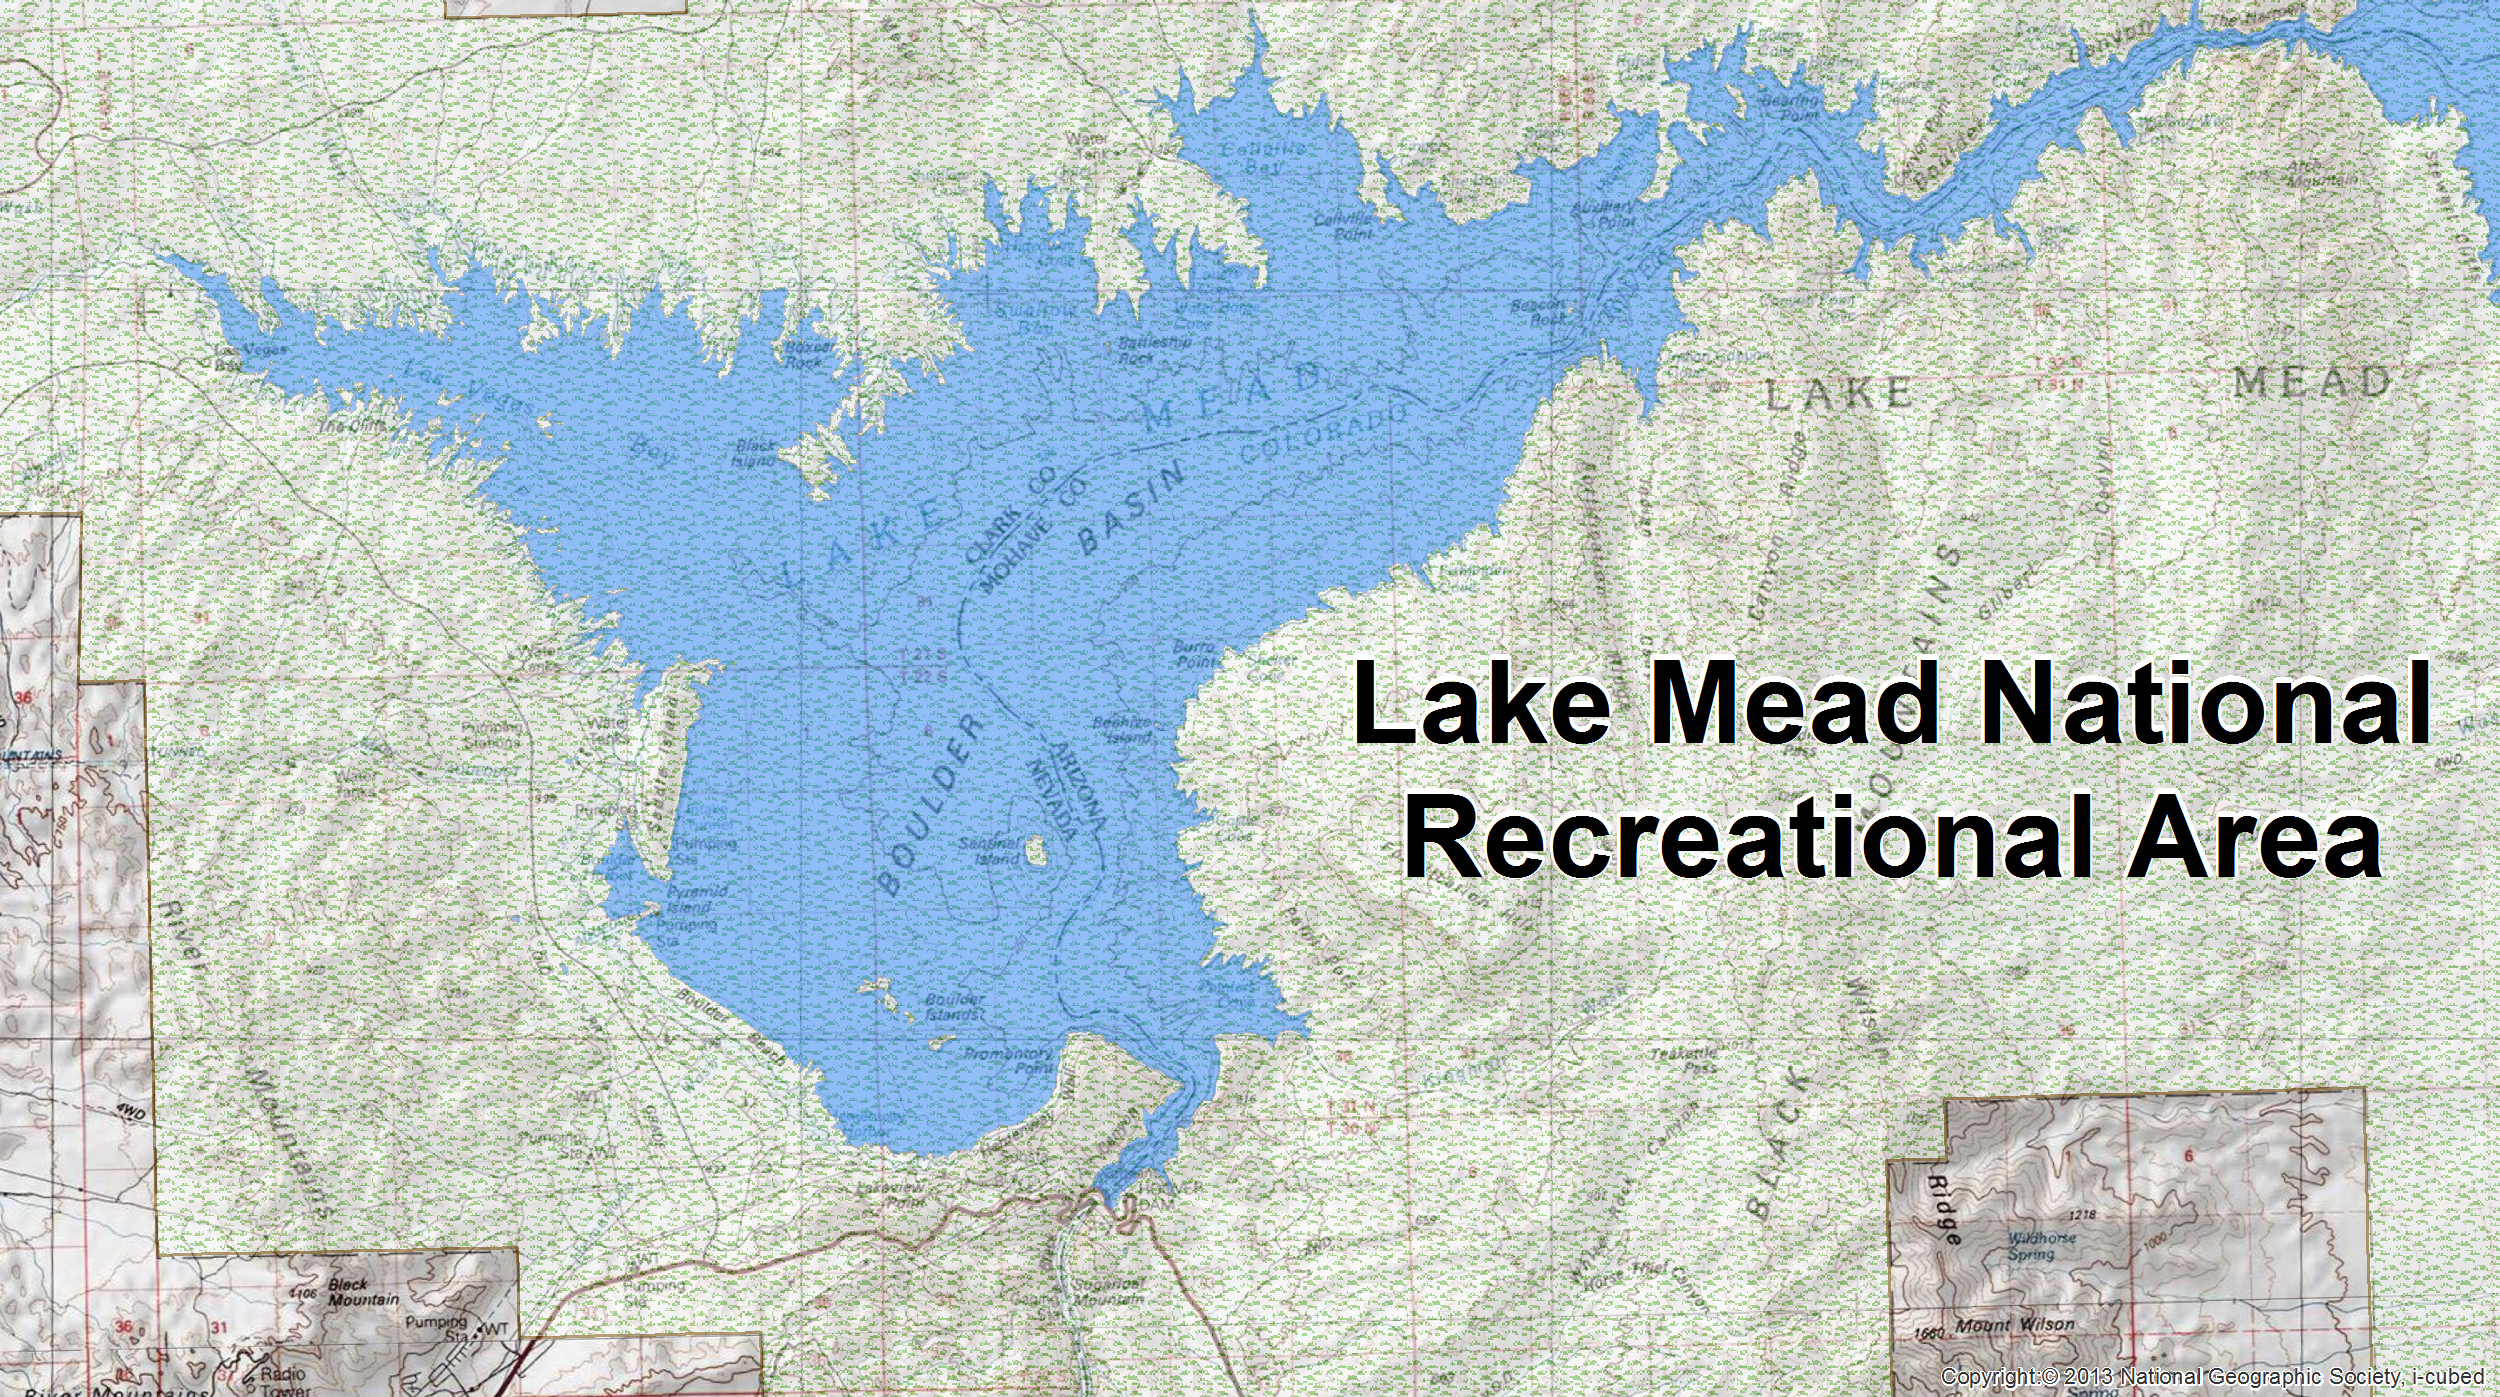 This is an image of part of Lake Mead National Recreational Area. The blue polygon is the NHDWaterbody delineation of Lake Mead.